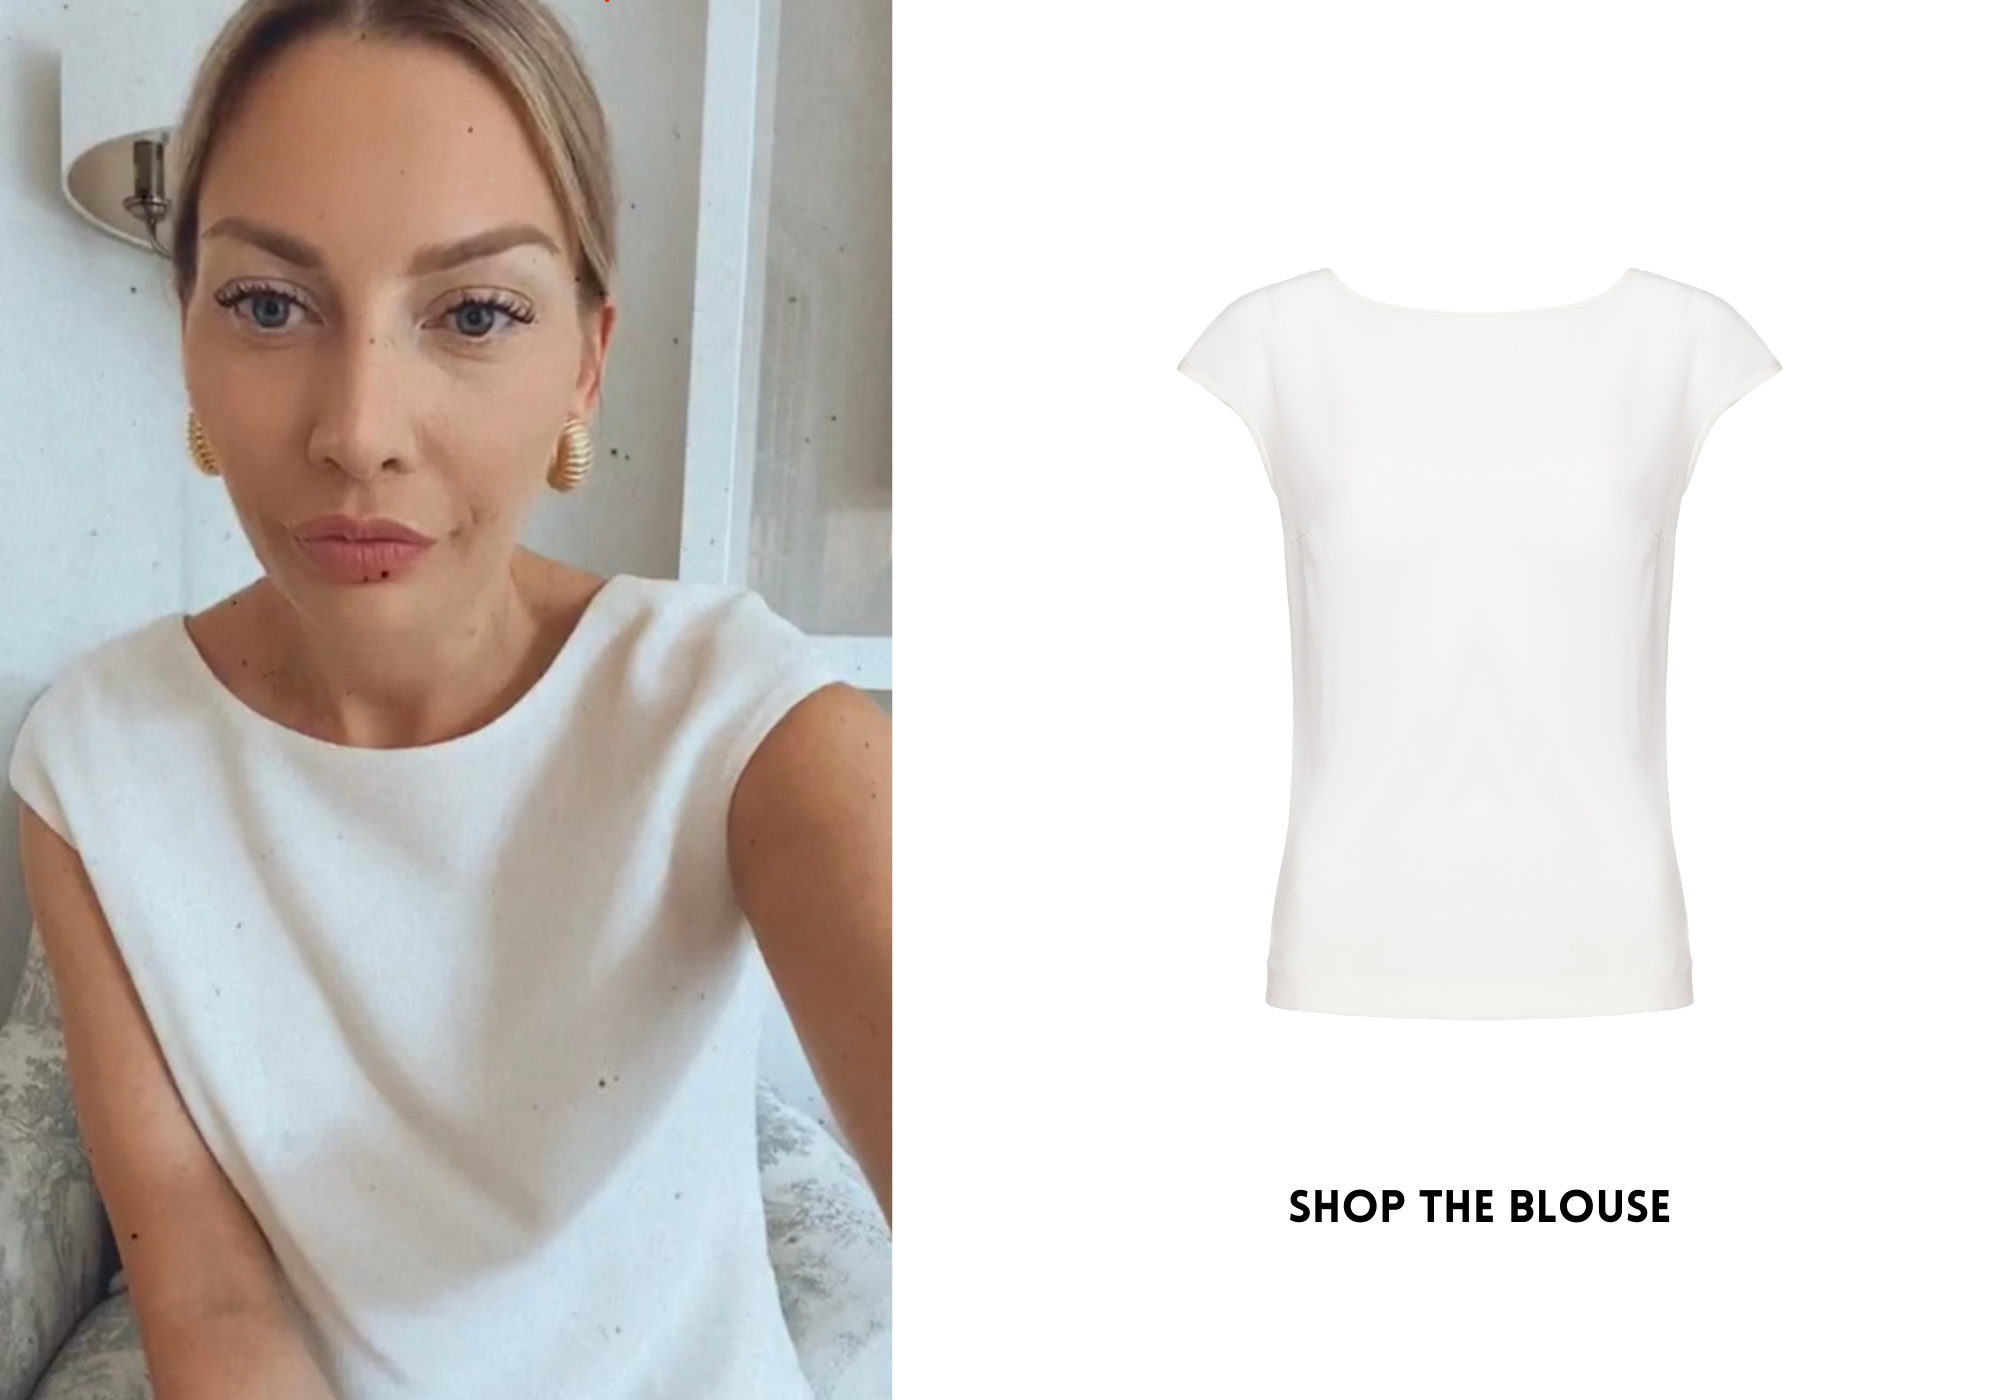 Anna Bey wearing simple white blouse